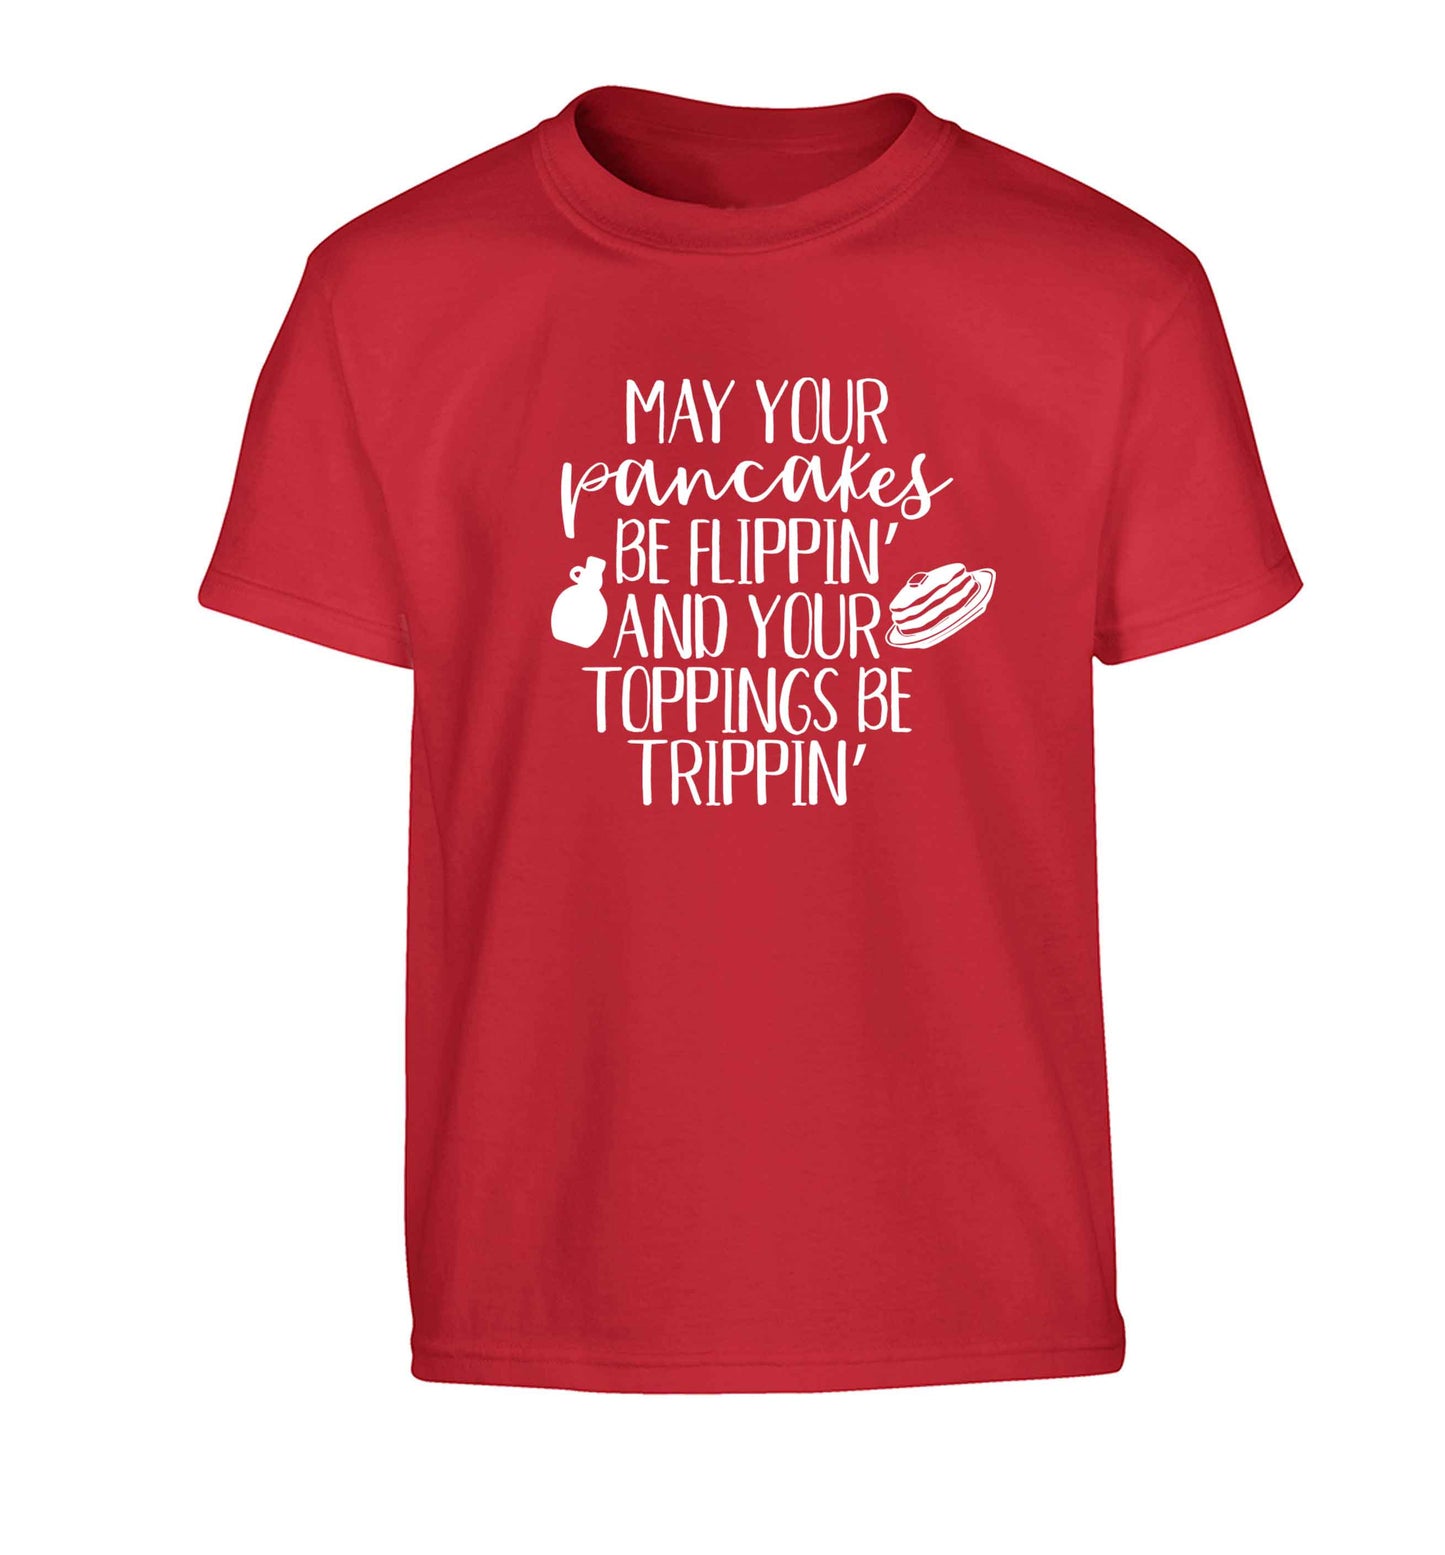 May your pancakes be flippin' and your toppings be trippin' Children's red Tshirt 12-13 Years